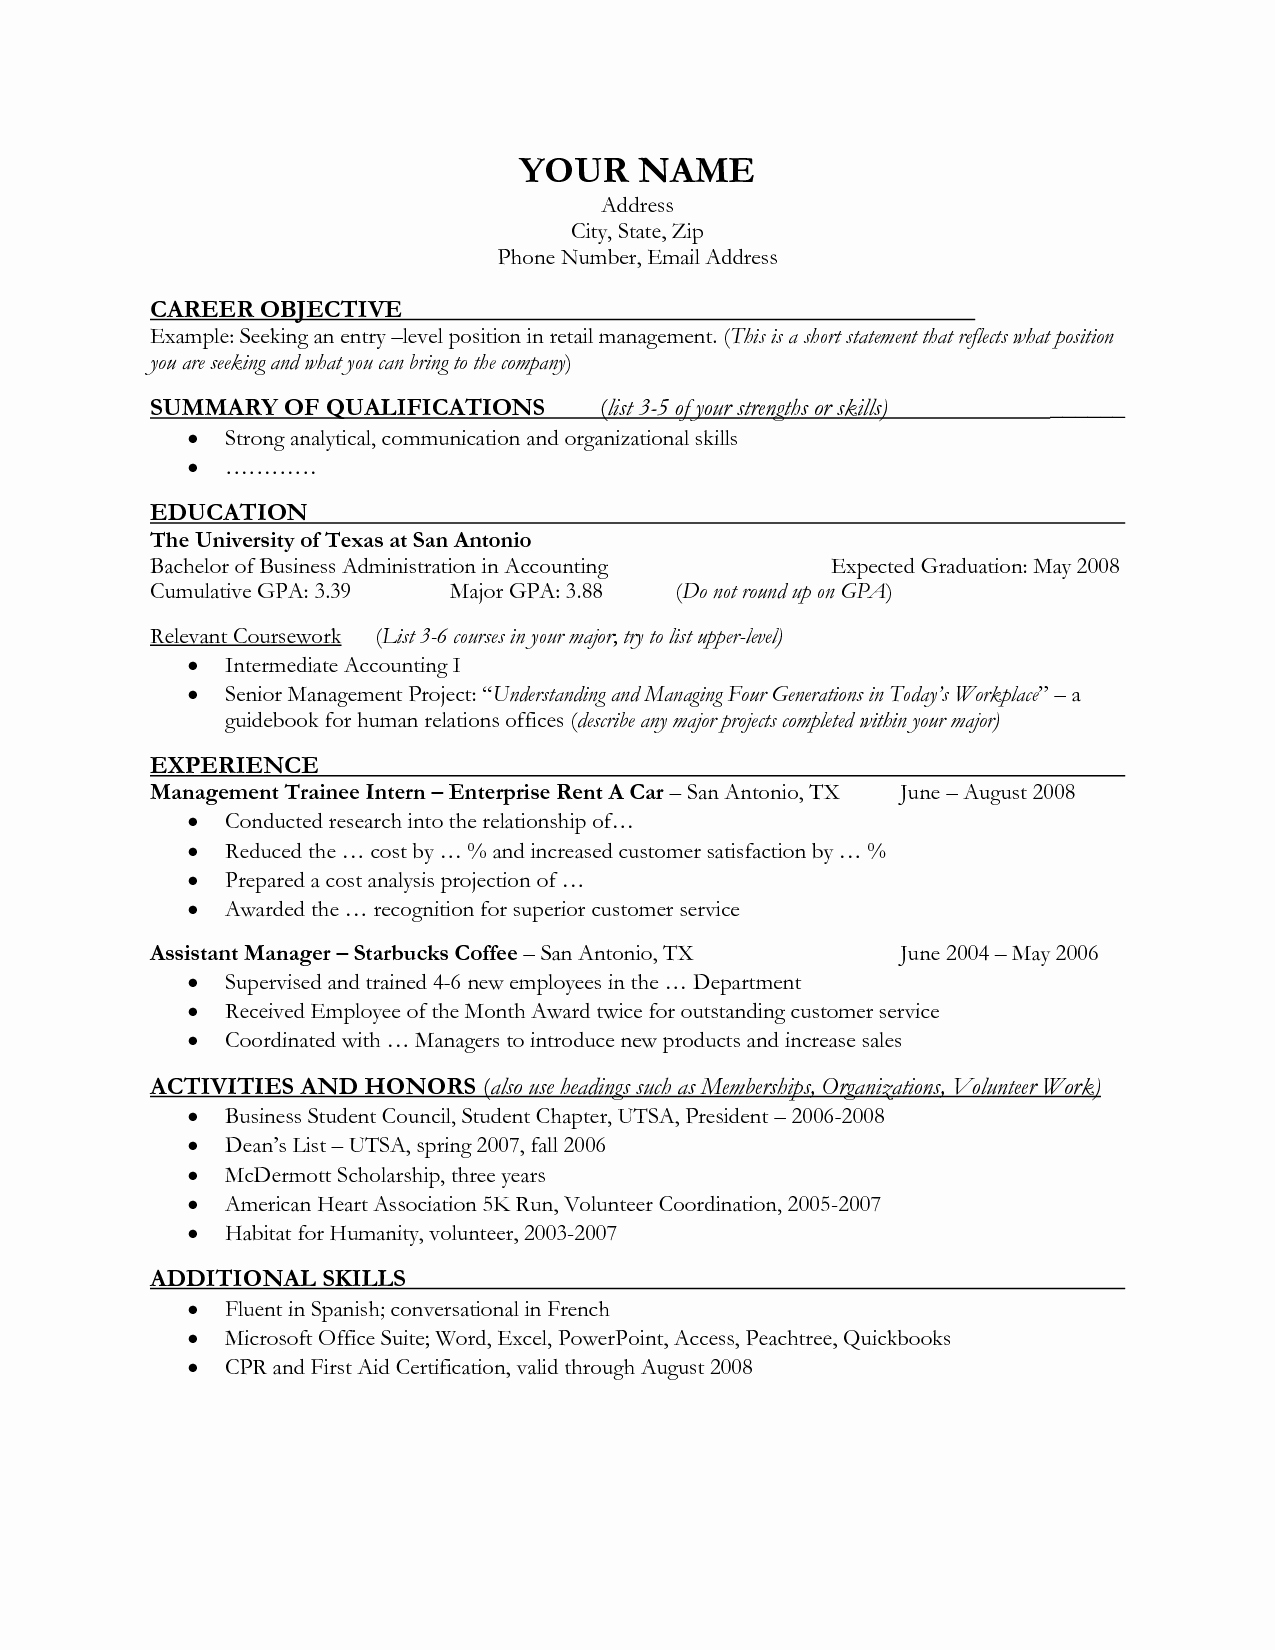 Objective for Manager Resume Of Retail Resume Objective